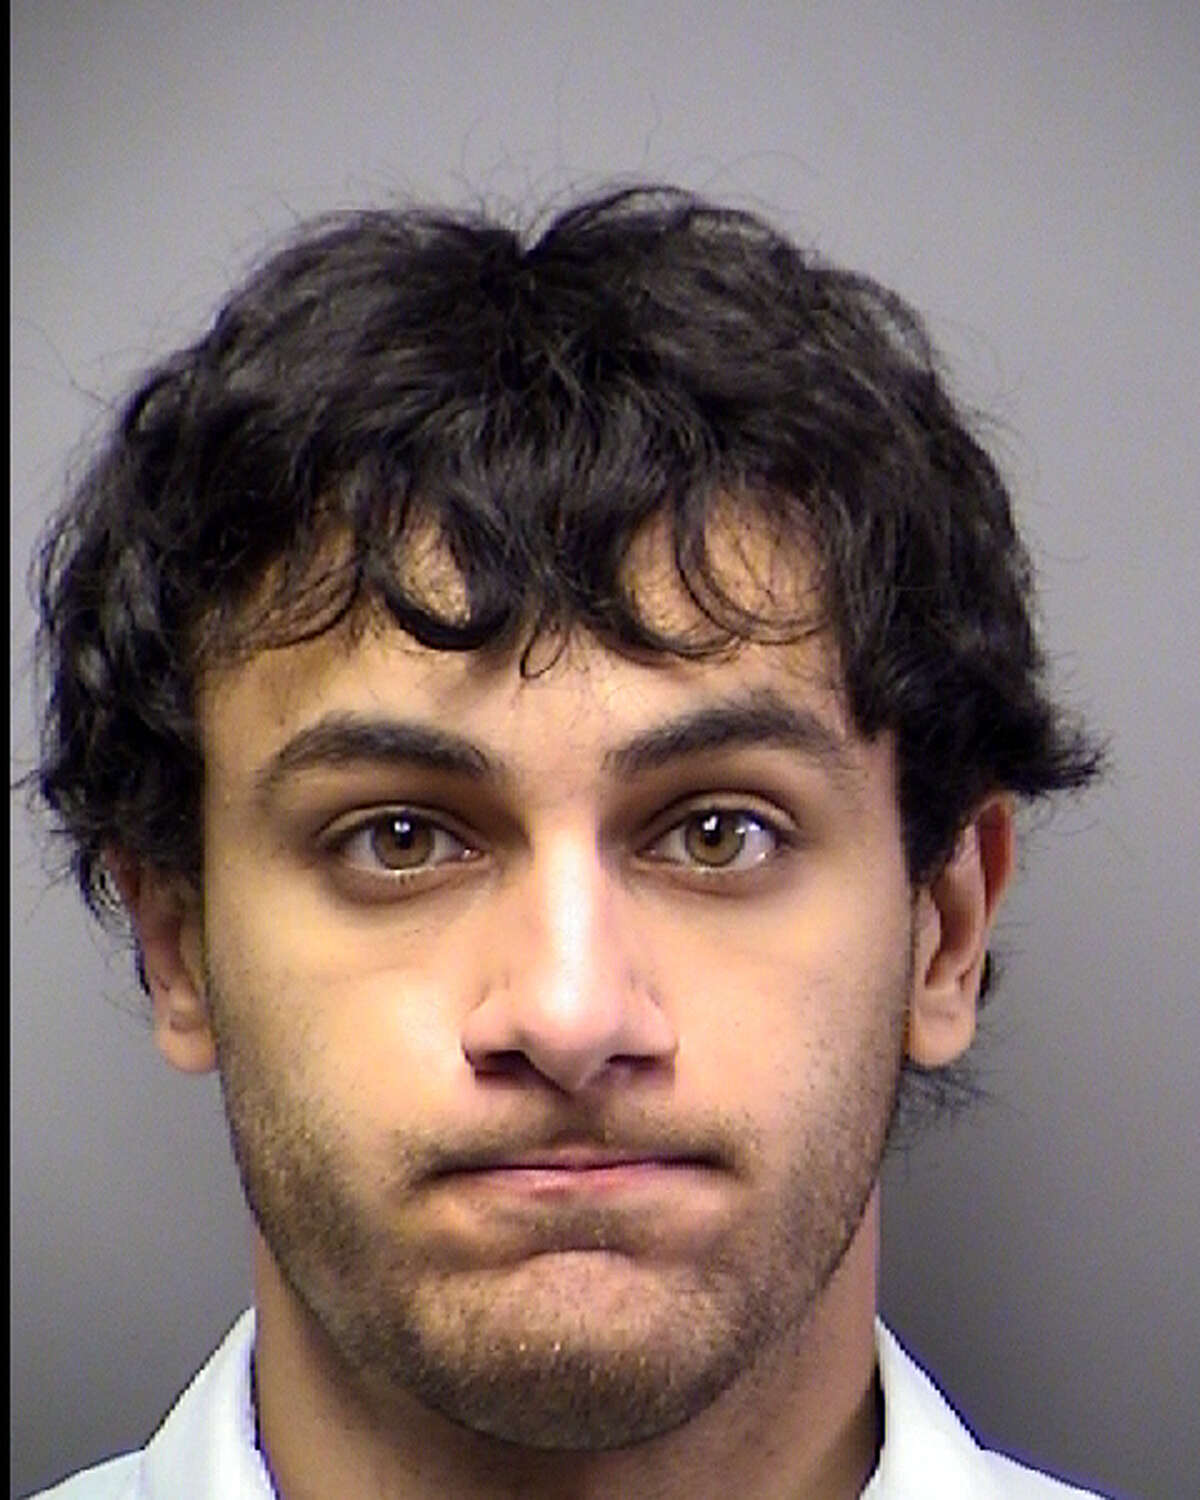 Aurash Javidinejad, 22,charged with hazing in connection with a Sigma Phi Epsilon incident on Sept. 4, 2011.